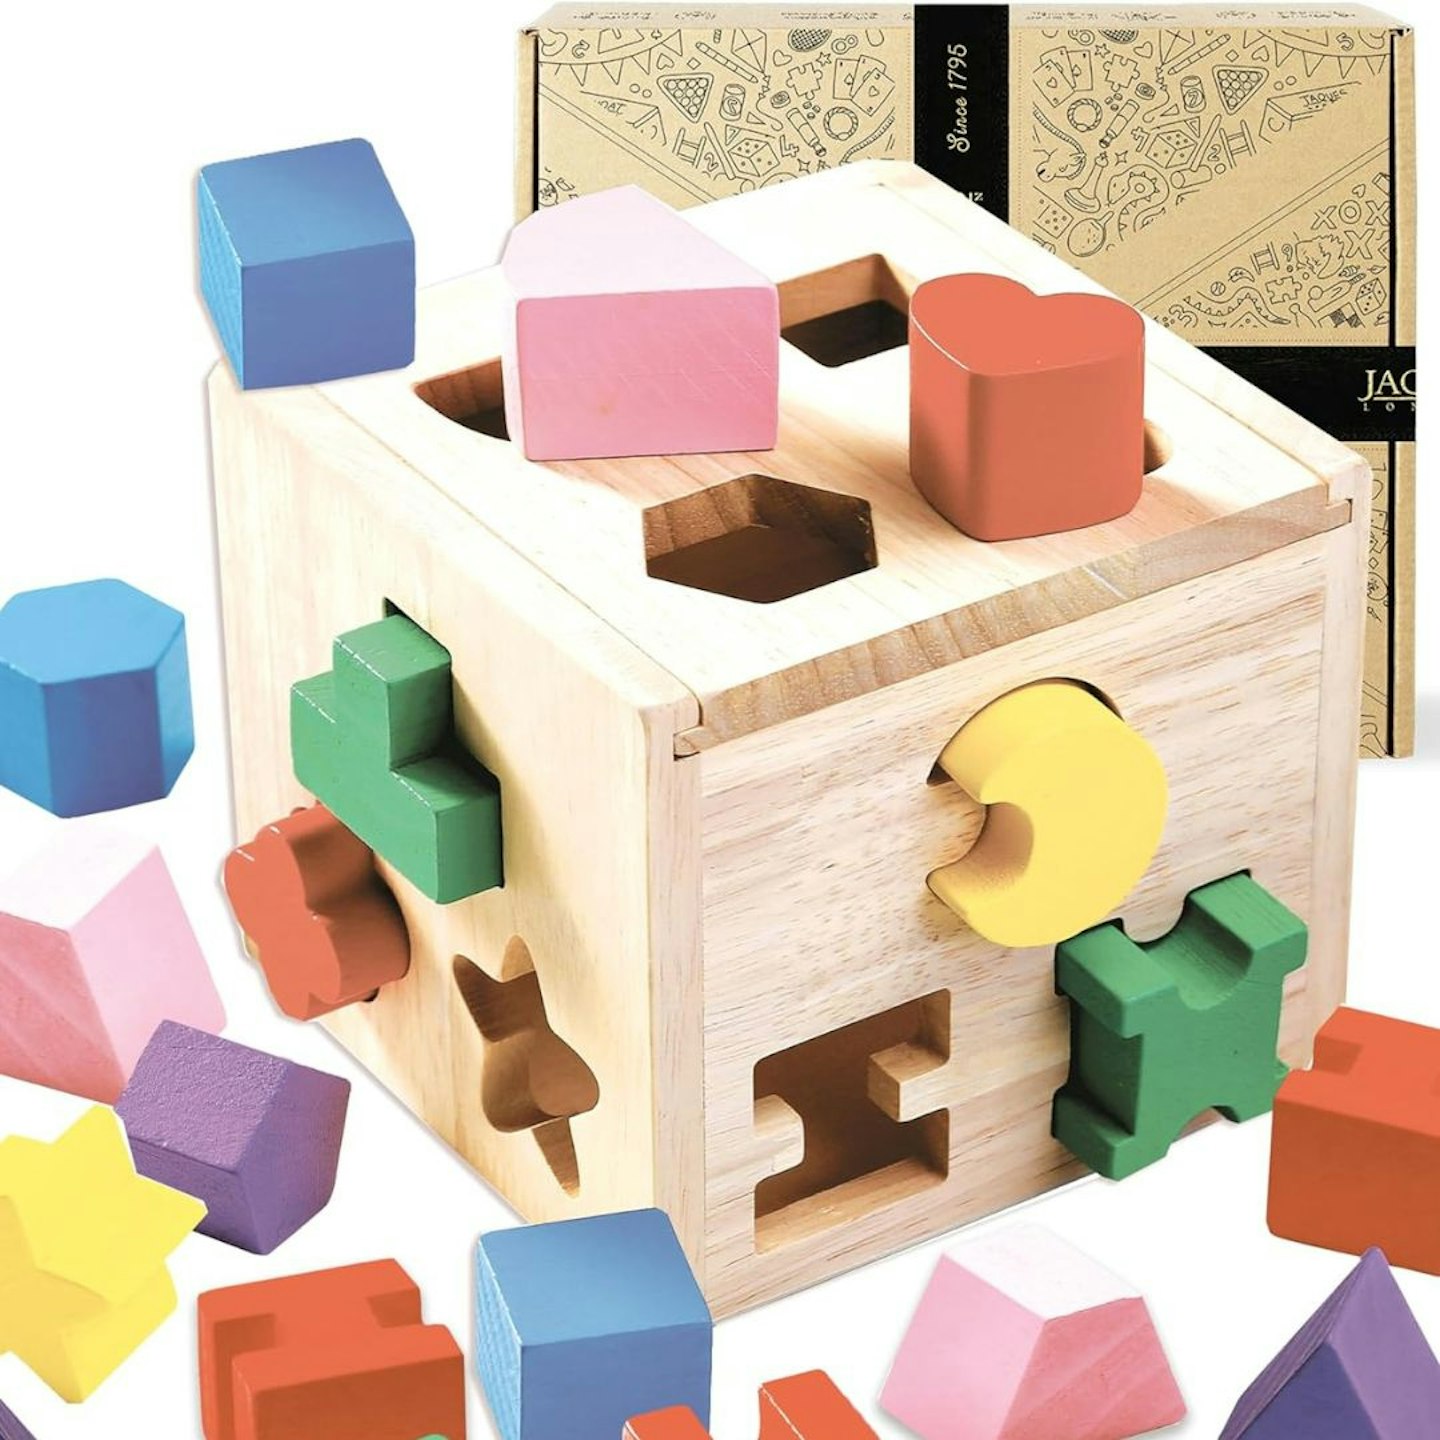 he Best Wooden Children's Toys: Jaques of London Wooden Shape Sorter Activity Cube for Toddlers